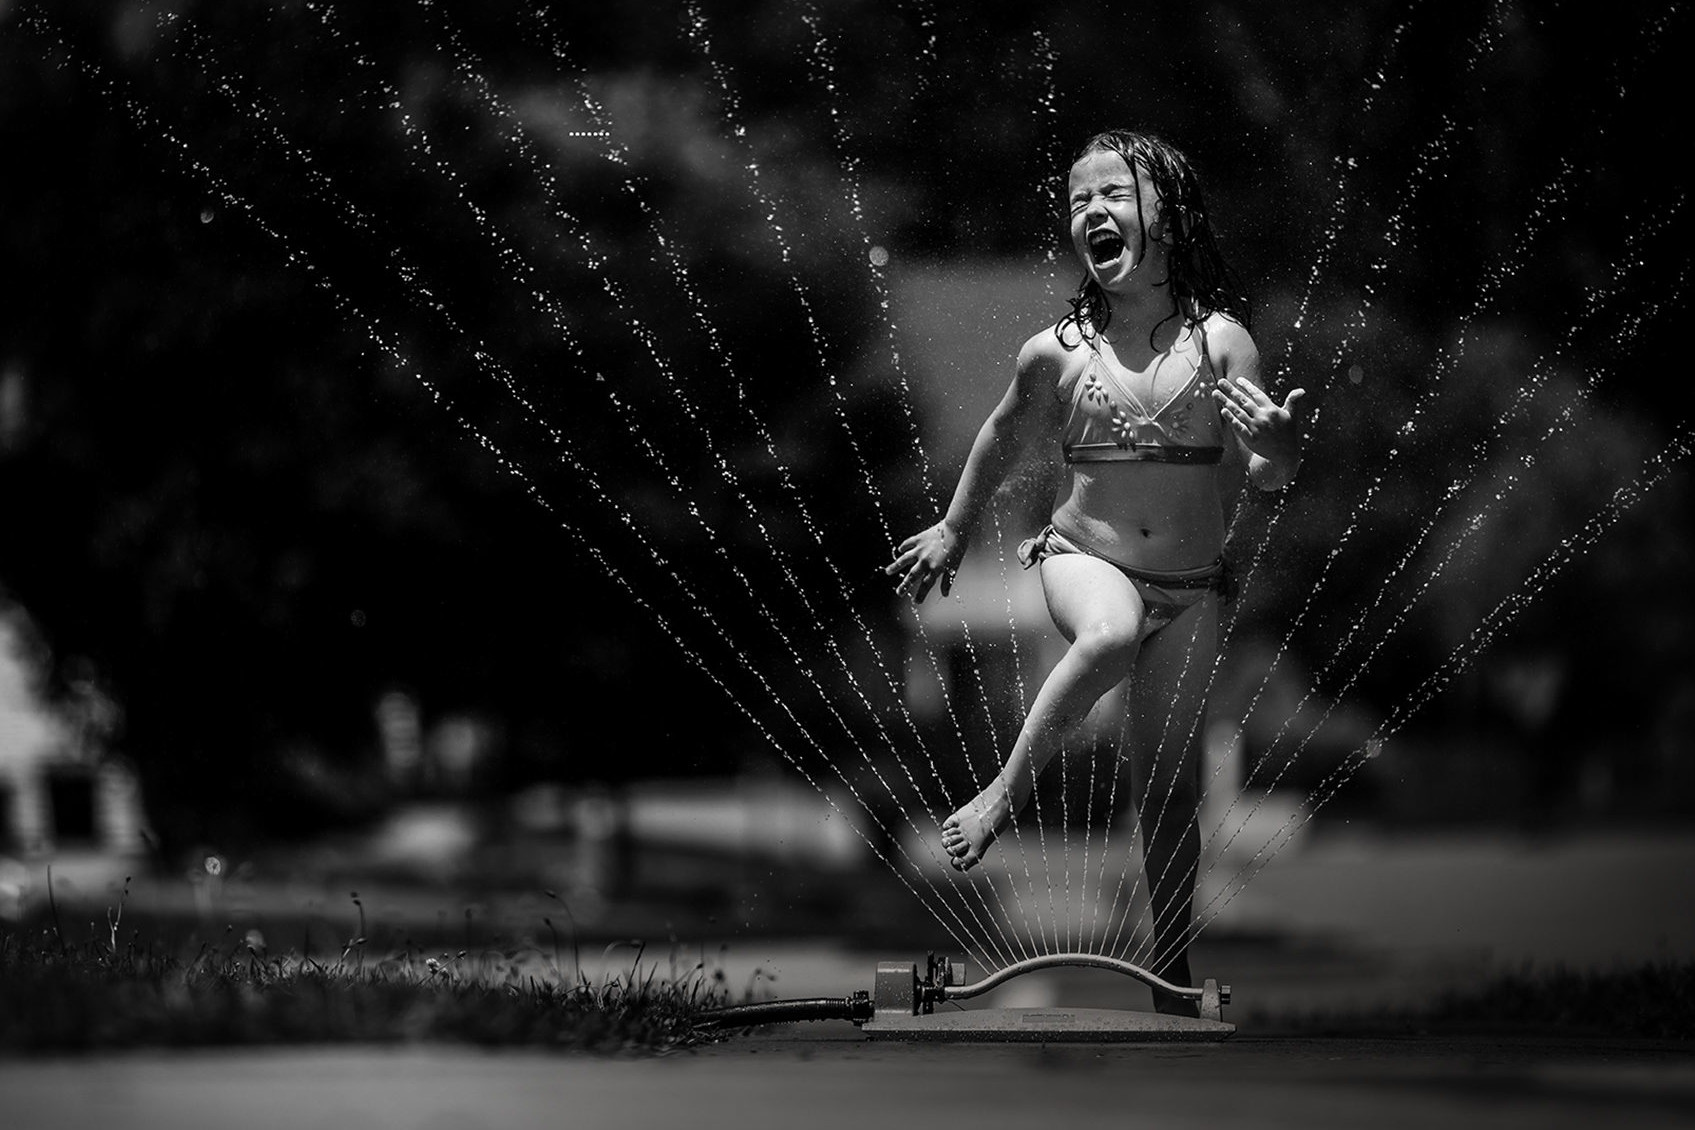 evolve young girl playing in sprinkler